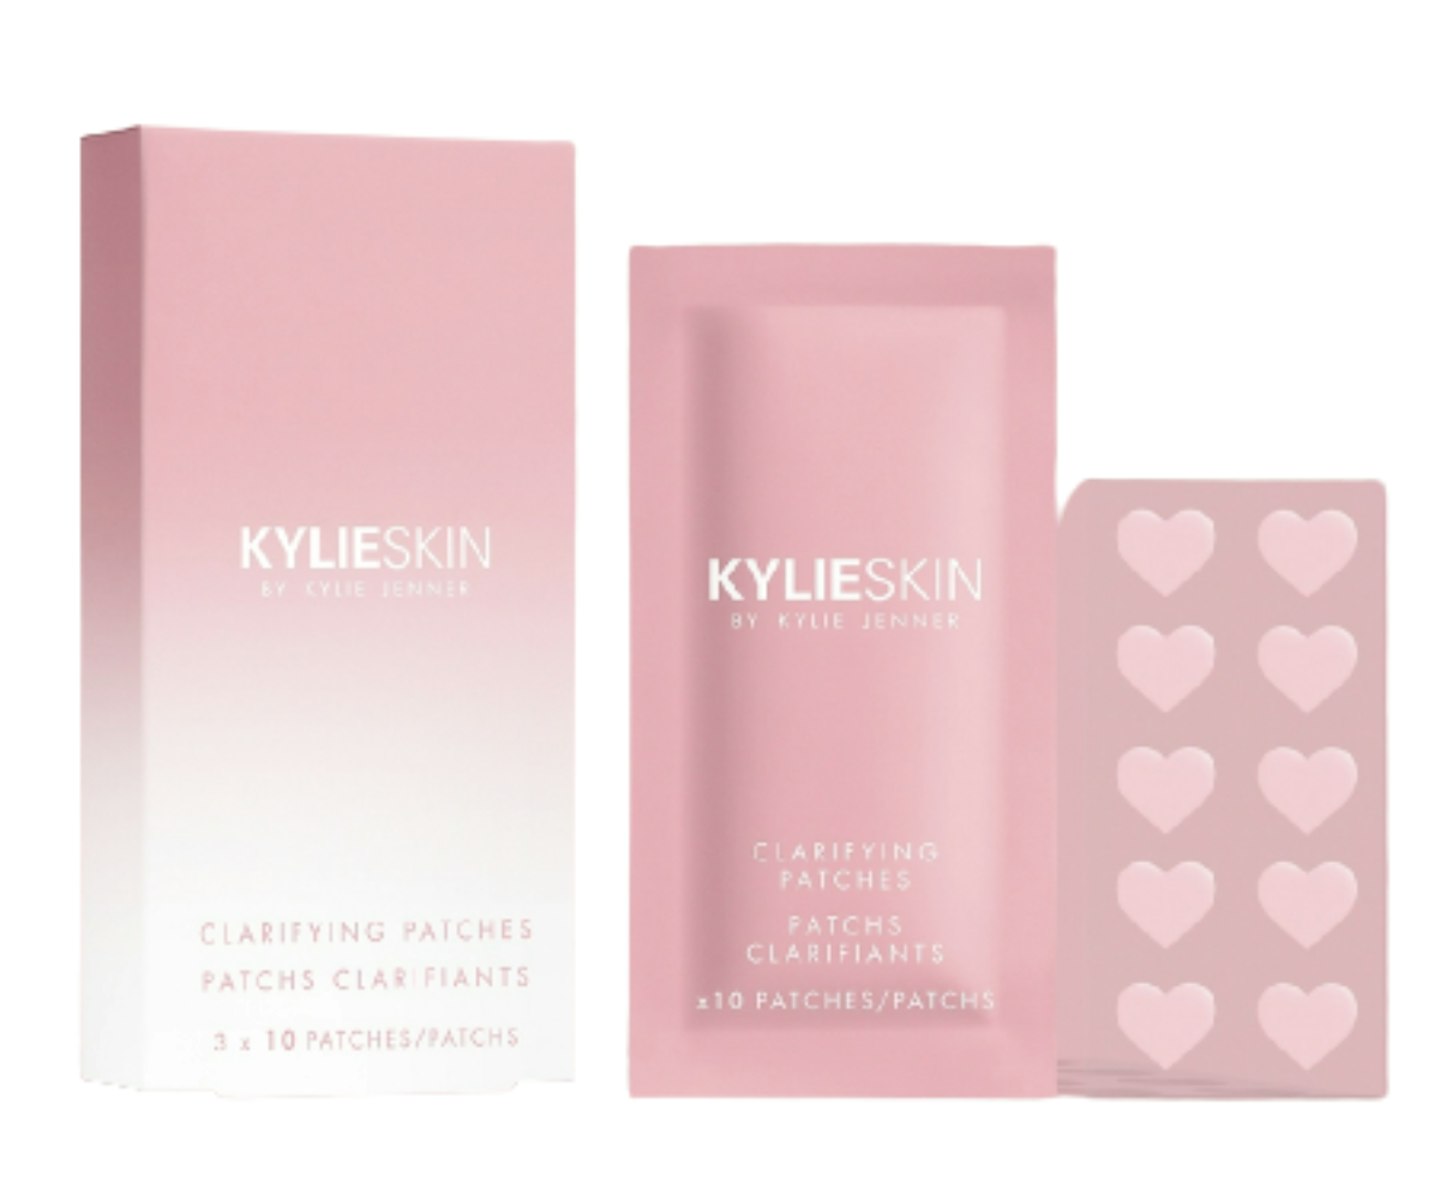 A picture of the Kylie Skin Clarifying Patches